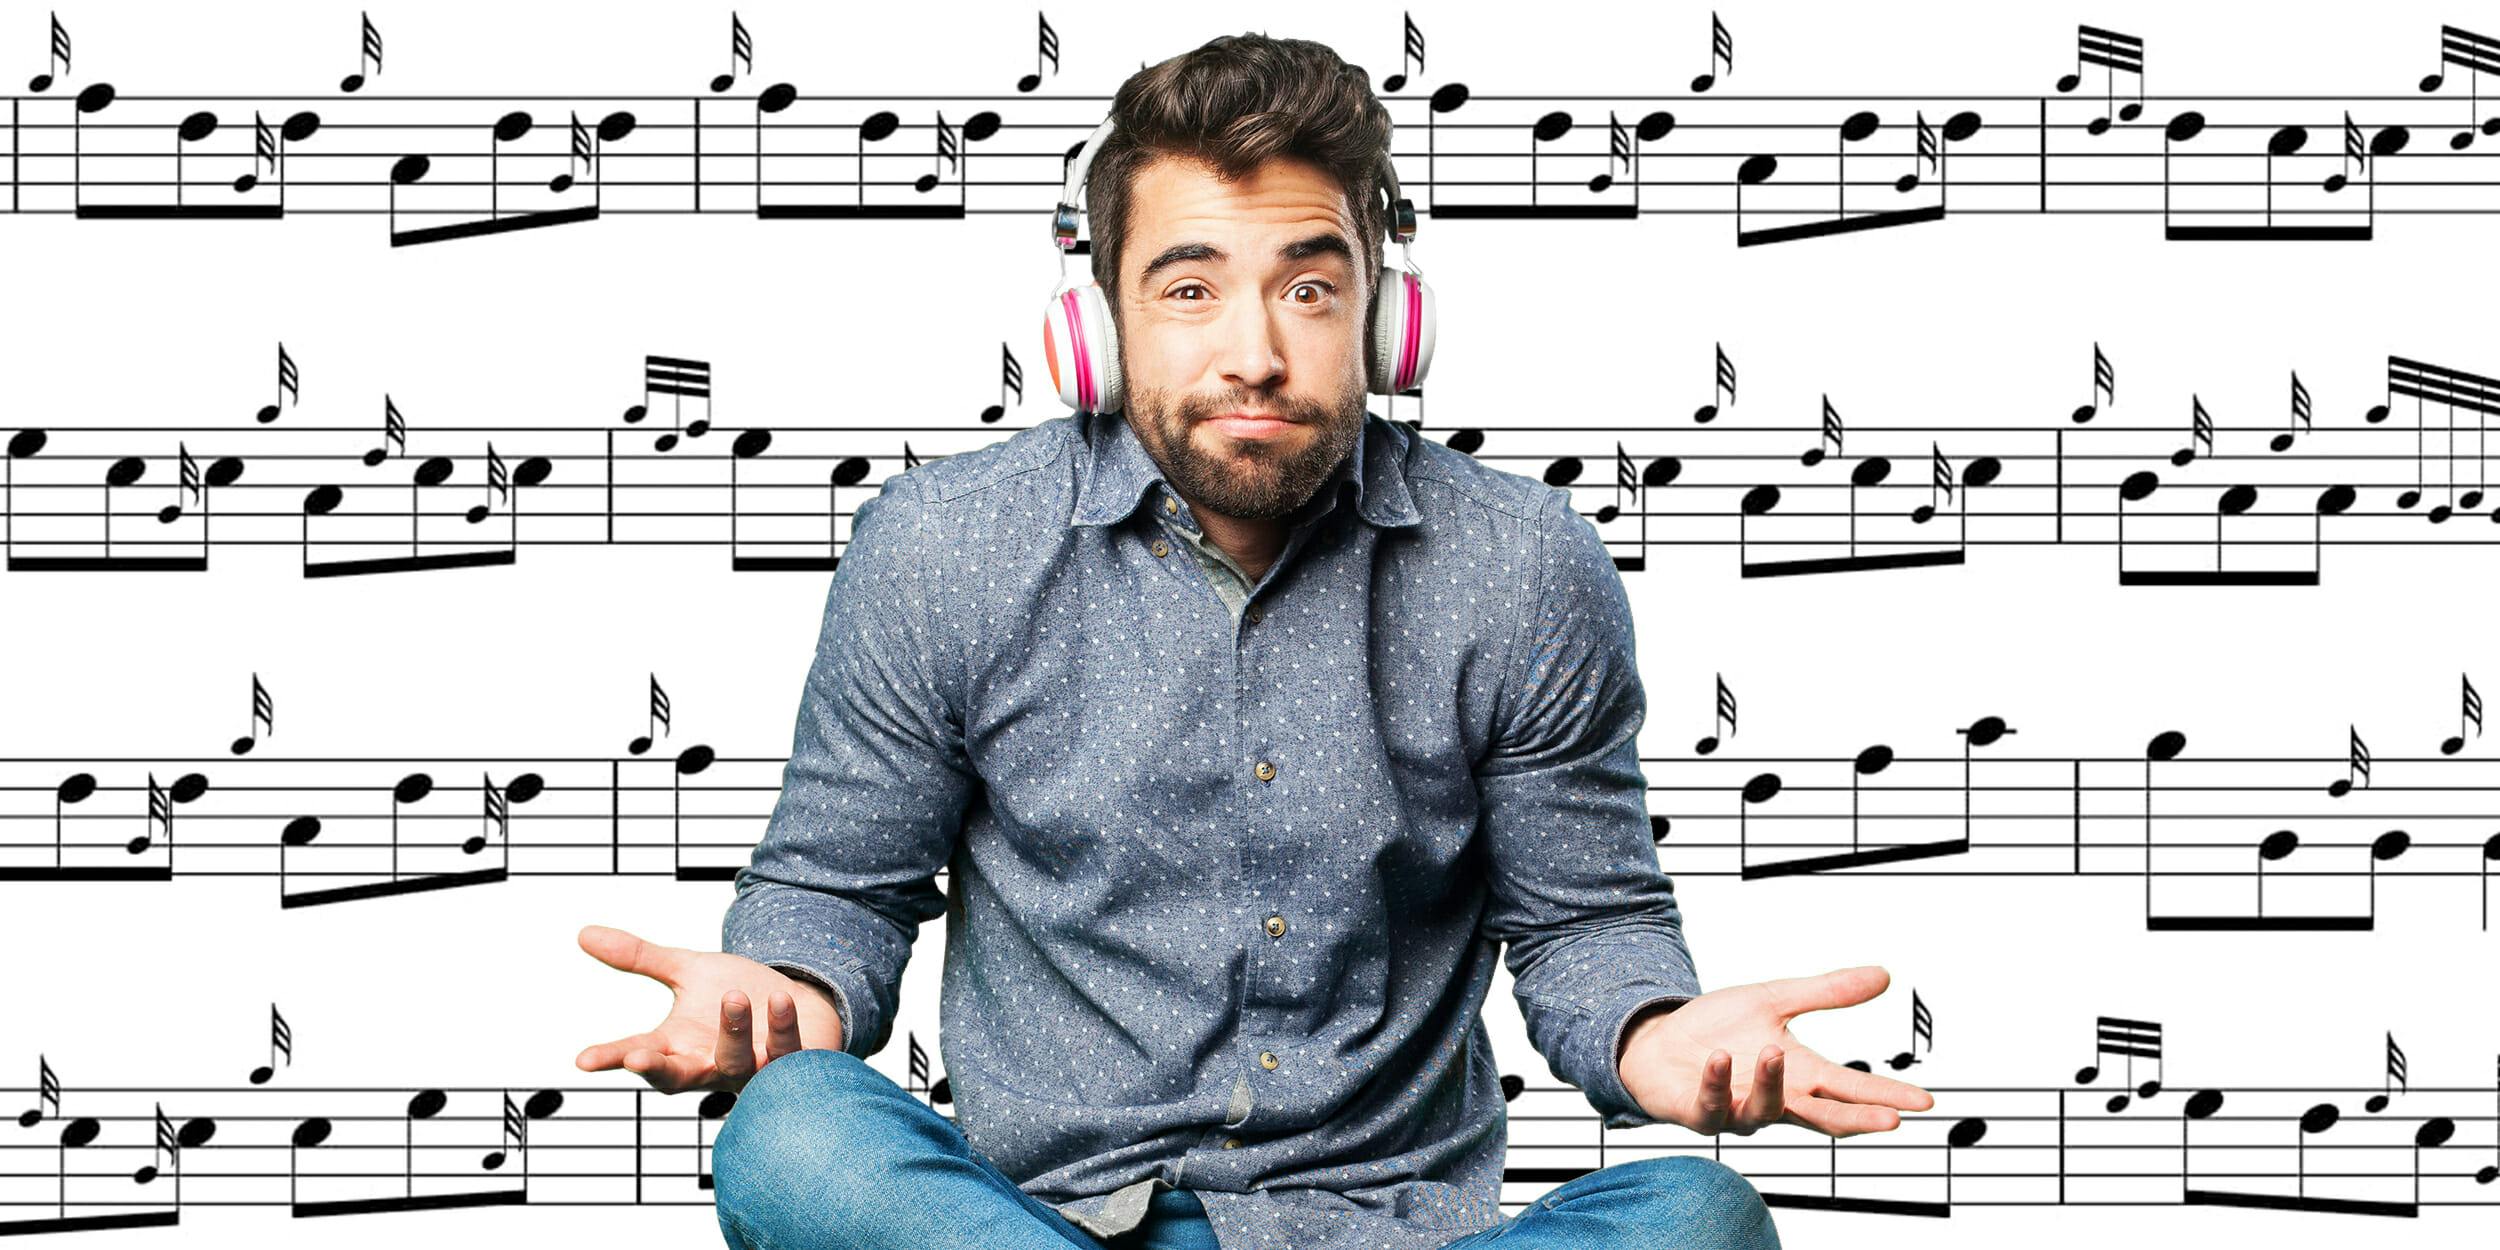 man with headphones shrugging in front of sheet music